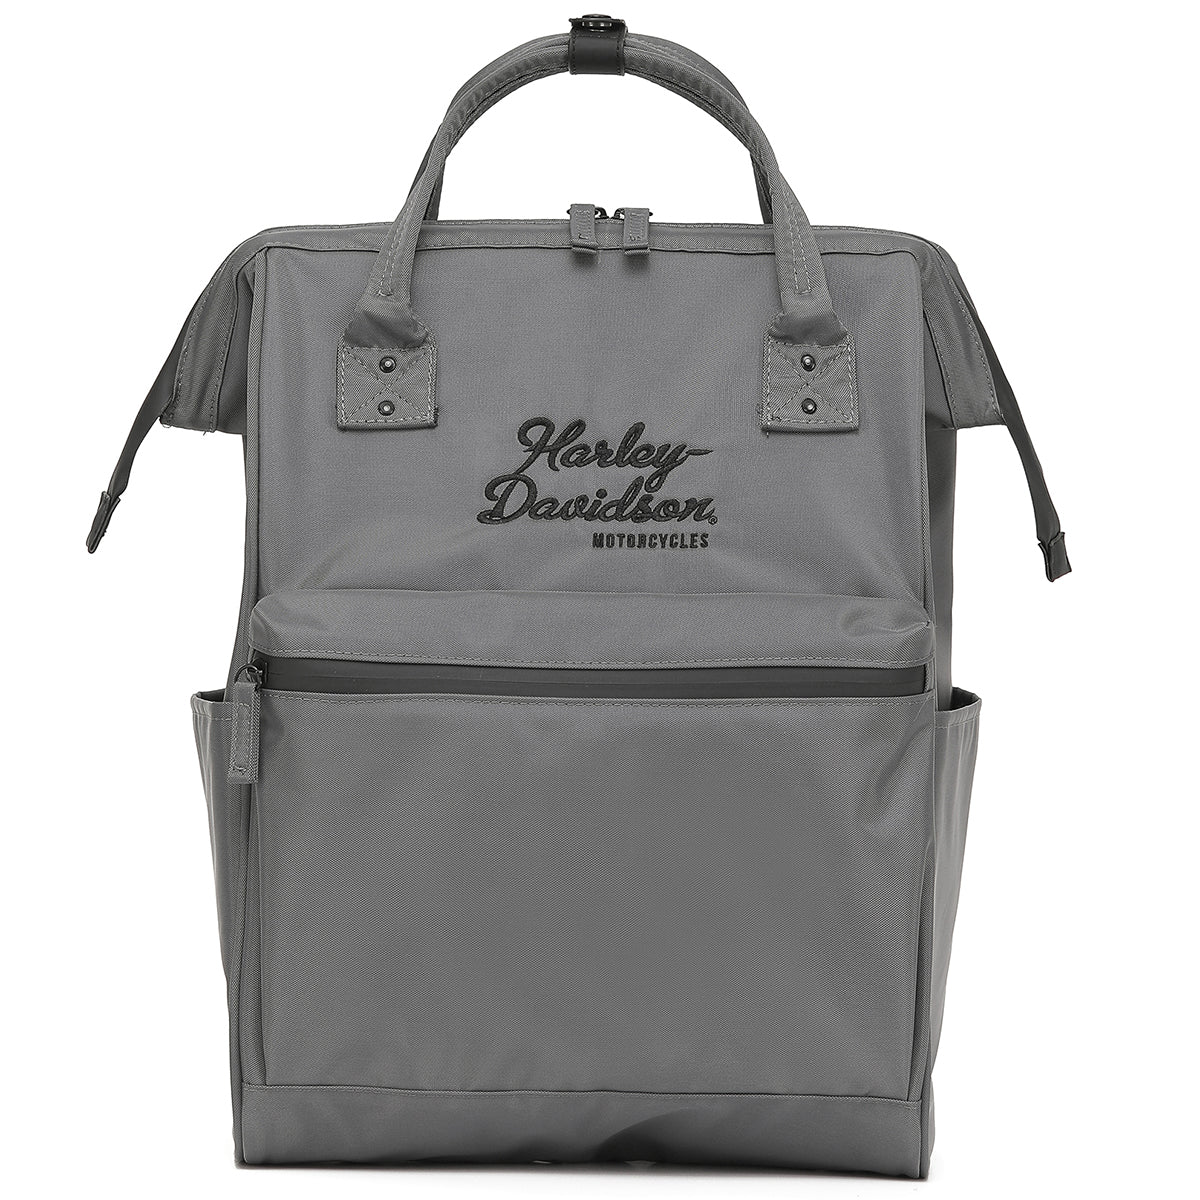 Harley Davidson Tote Bag - clothing & accessories - by owner